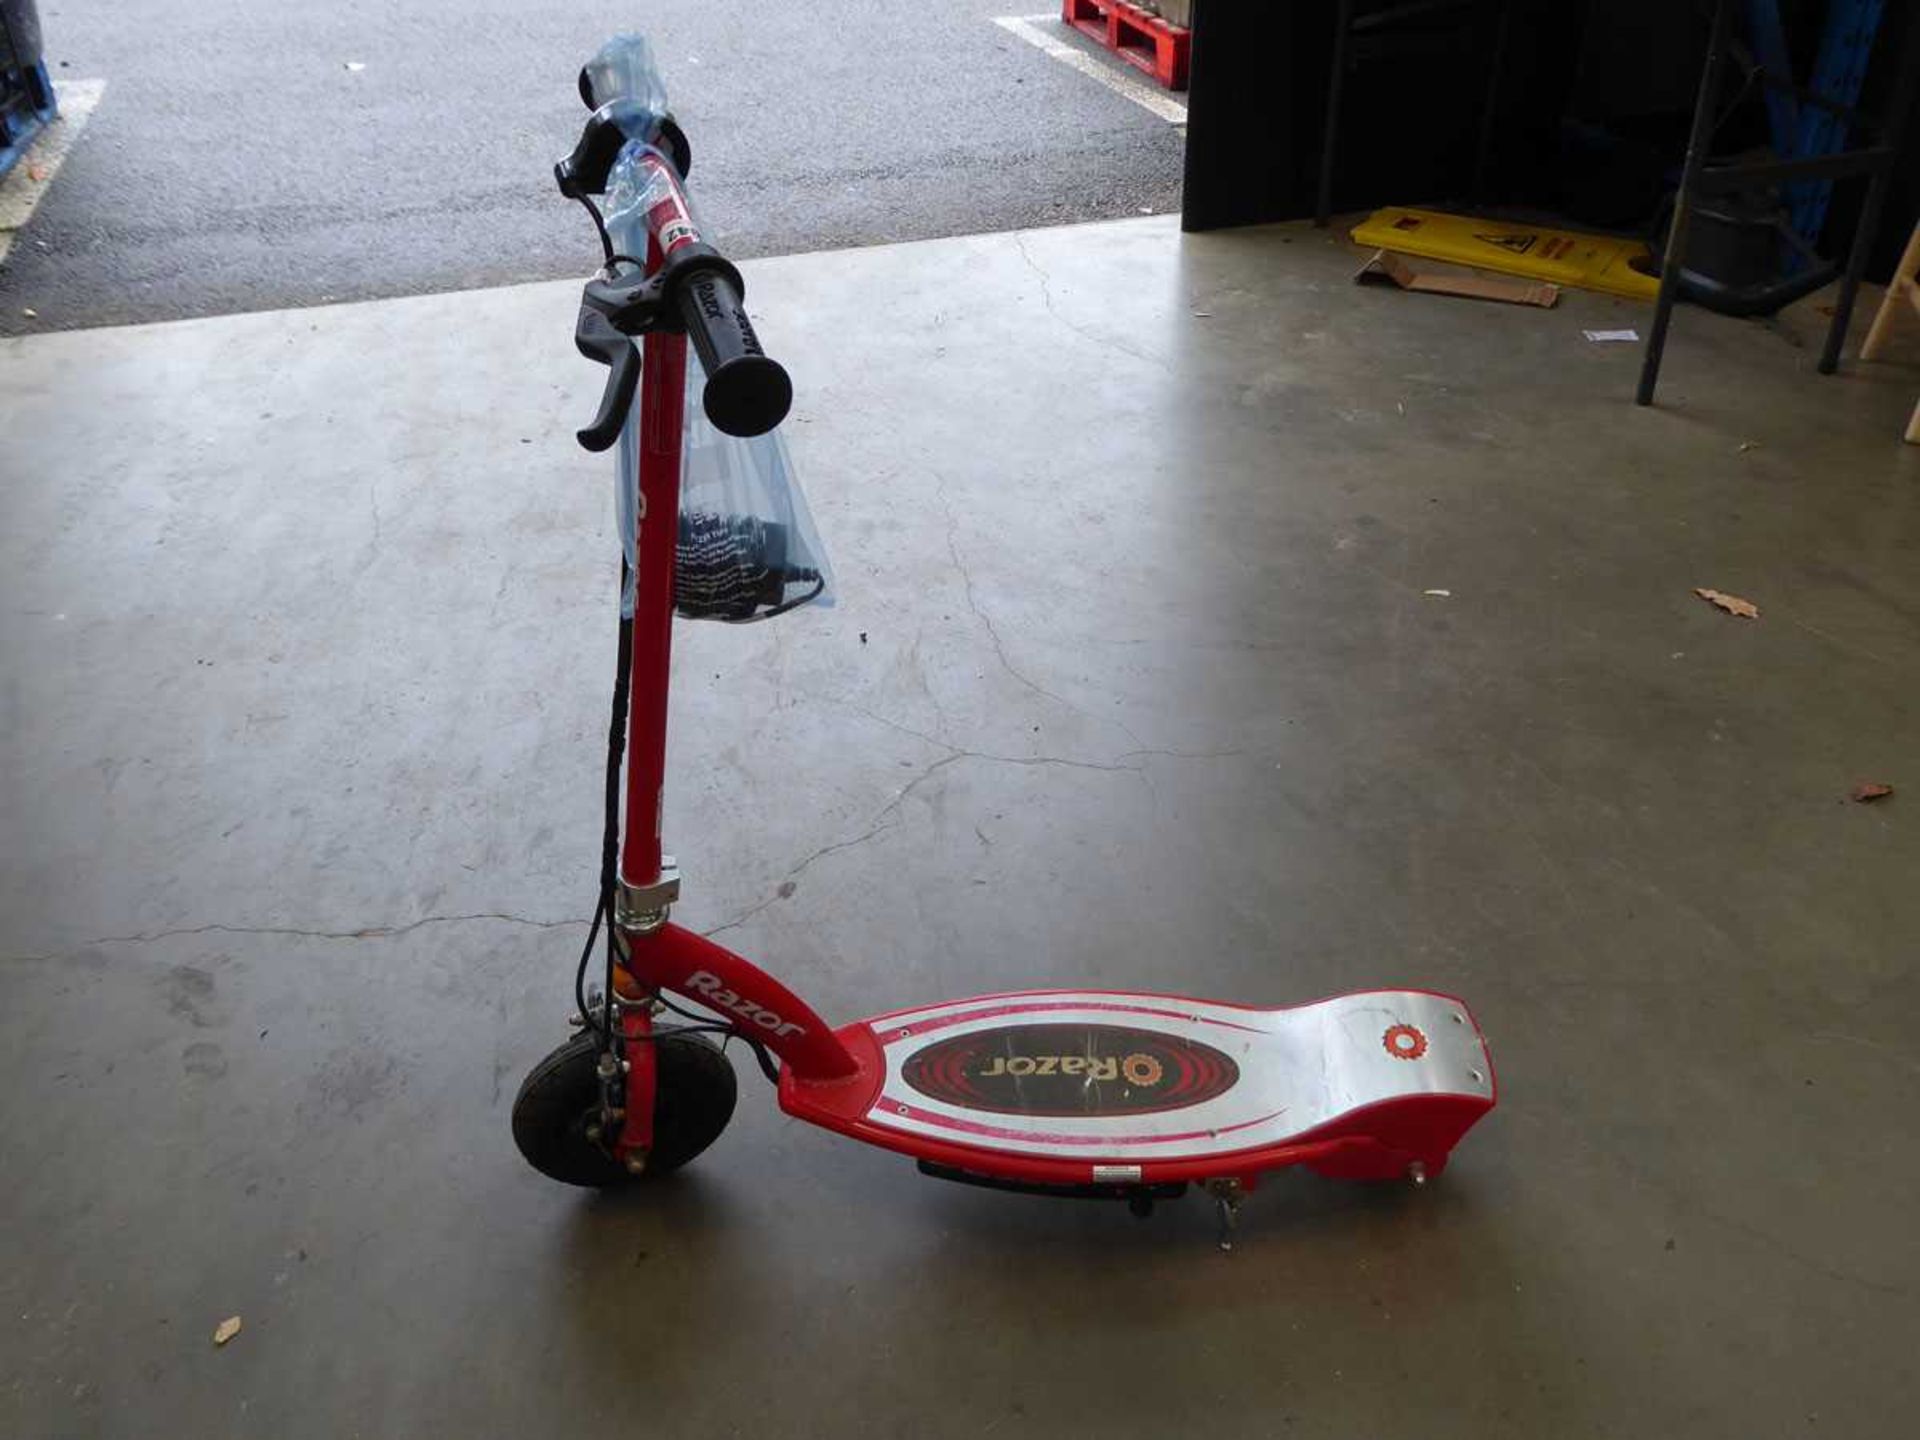 Razor electric scooter, with charger in bag